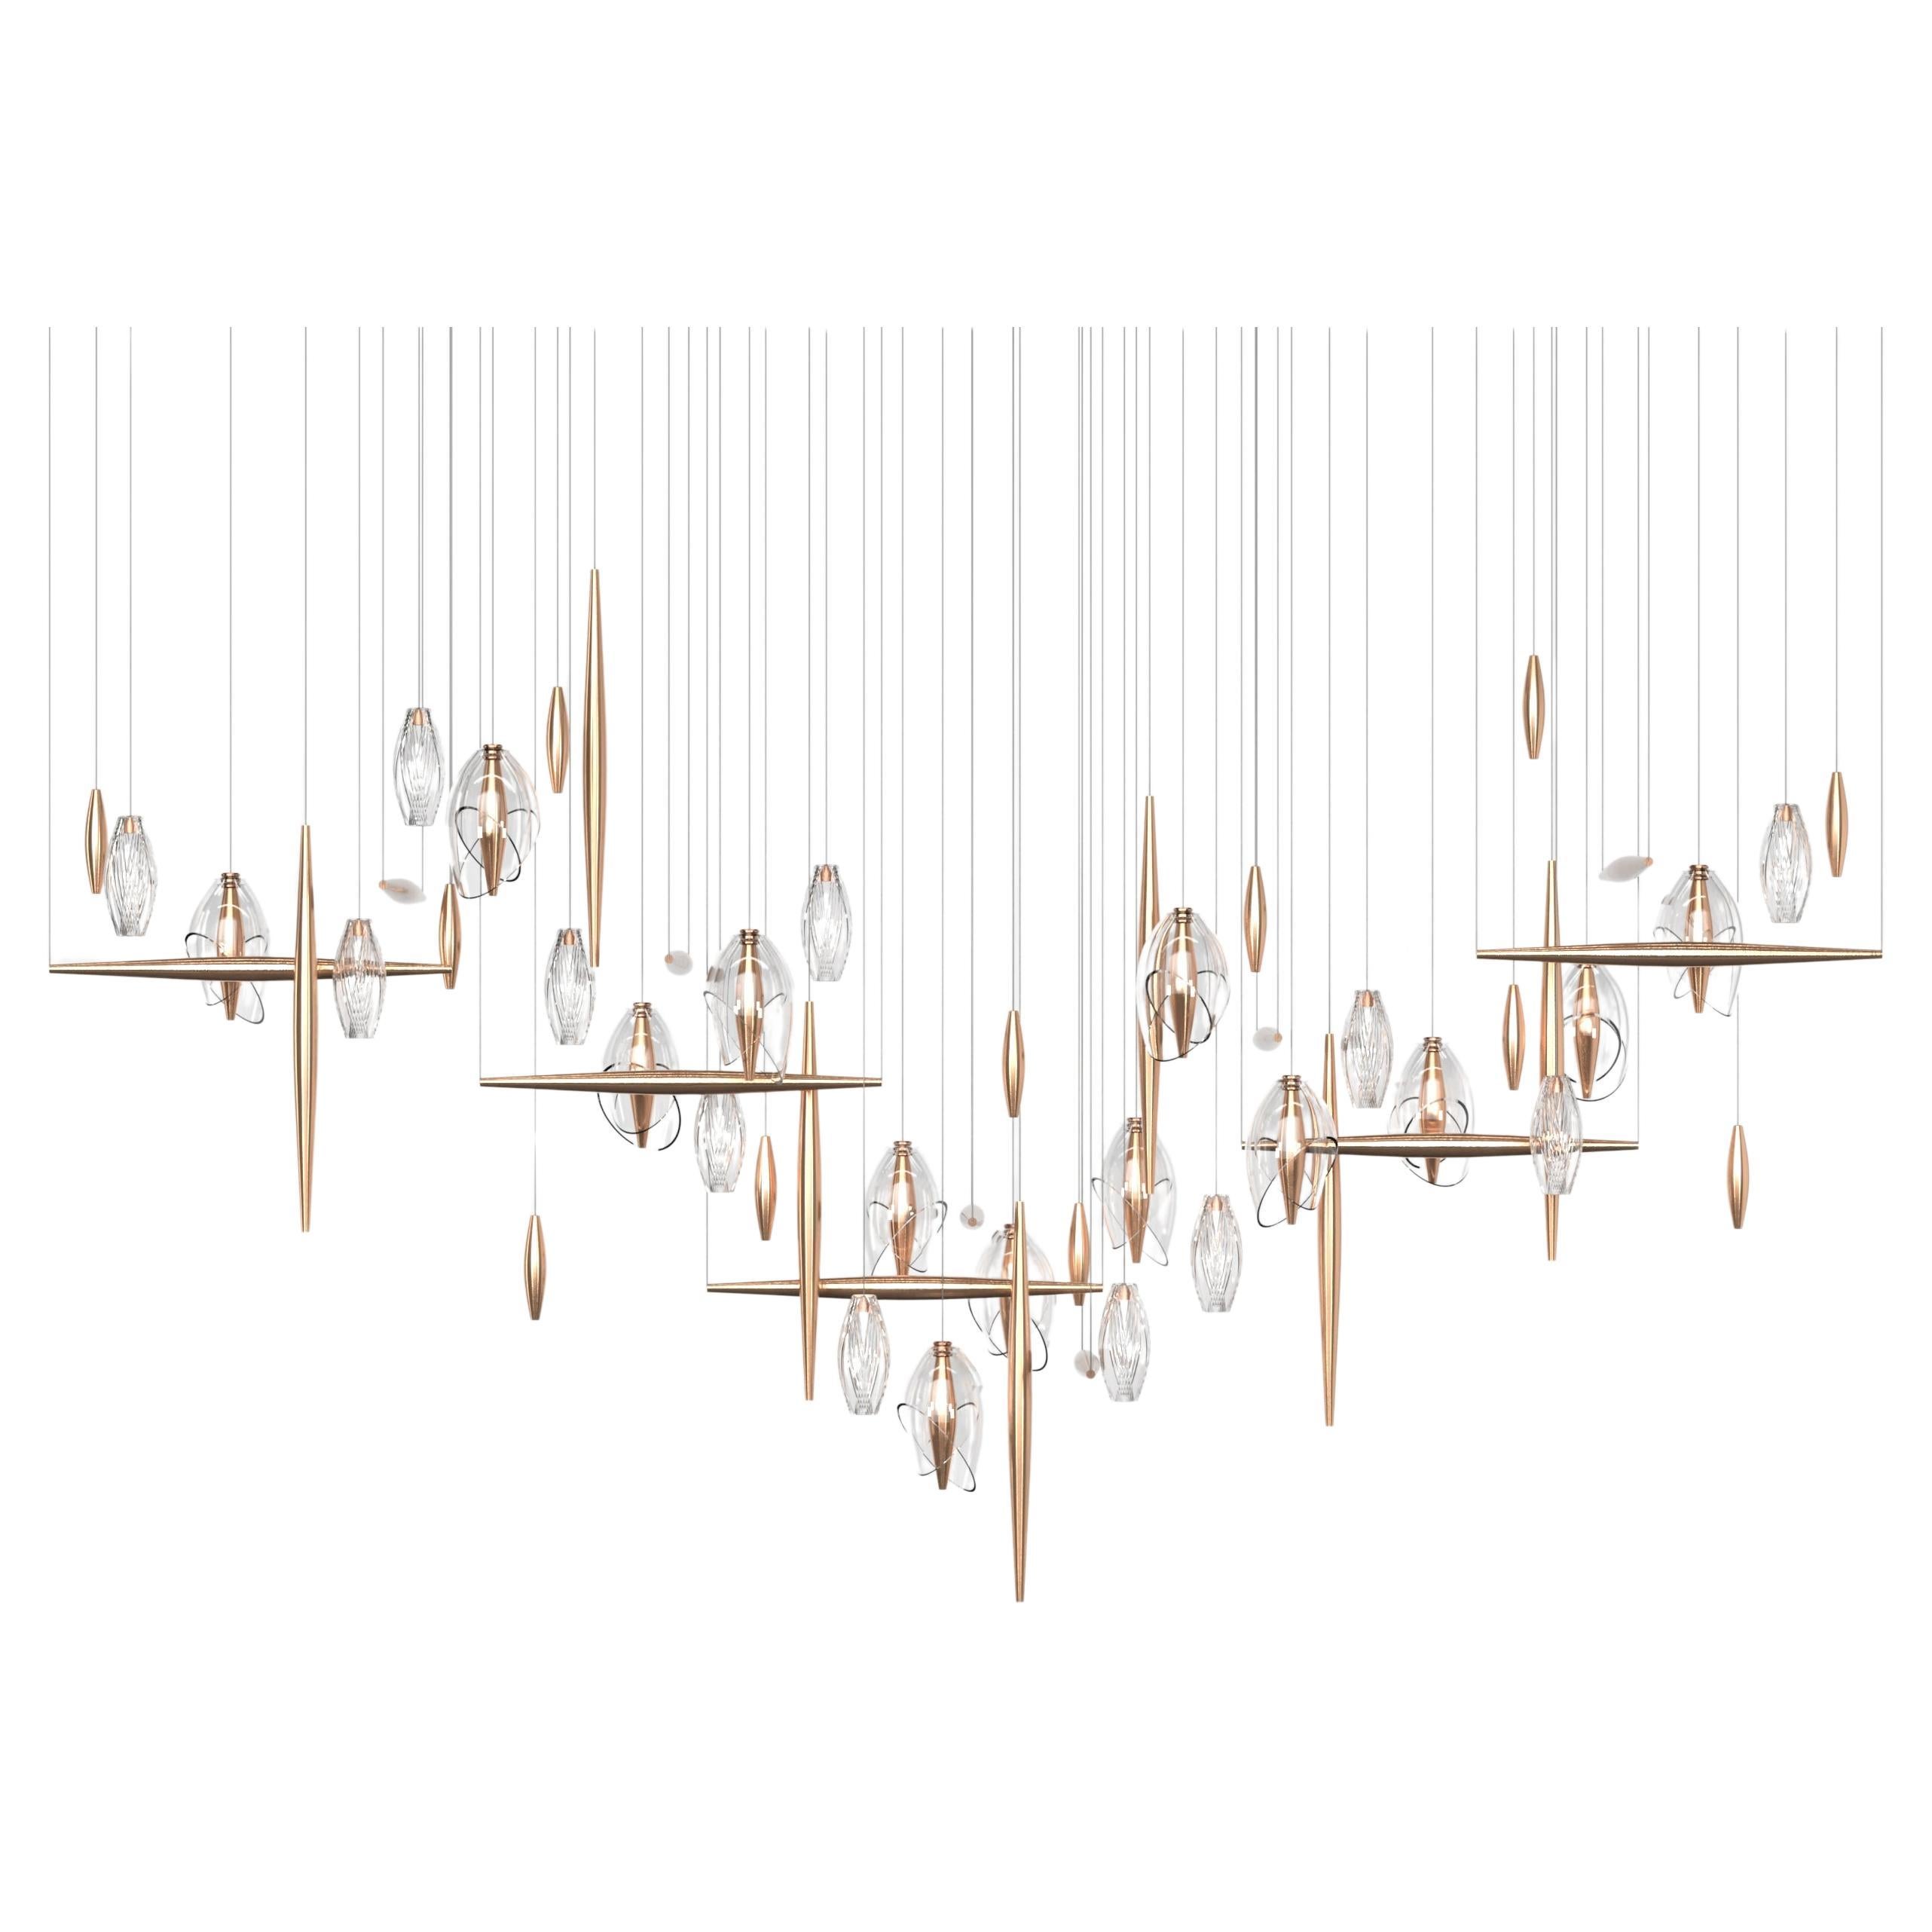 L 2500 Prisms with Ballerinas Pendant Lamp C by Tanuj Arora For Sale